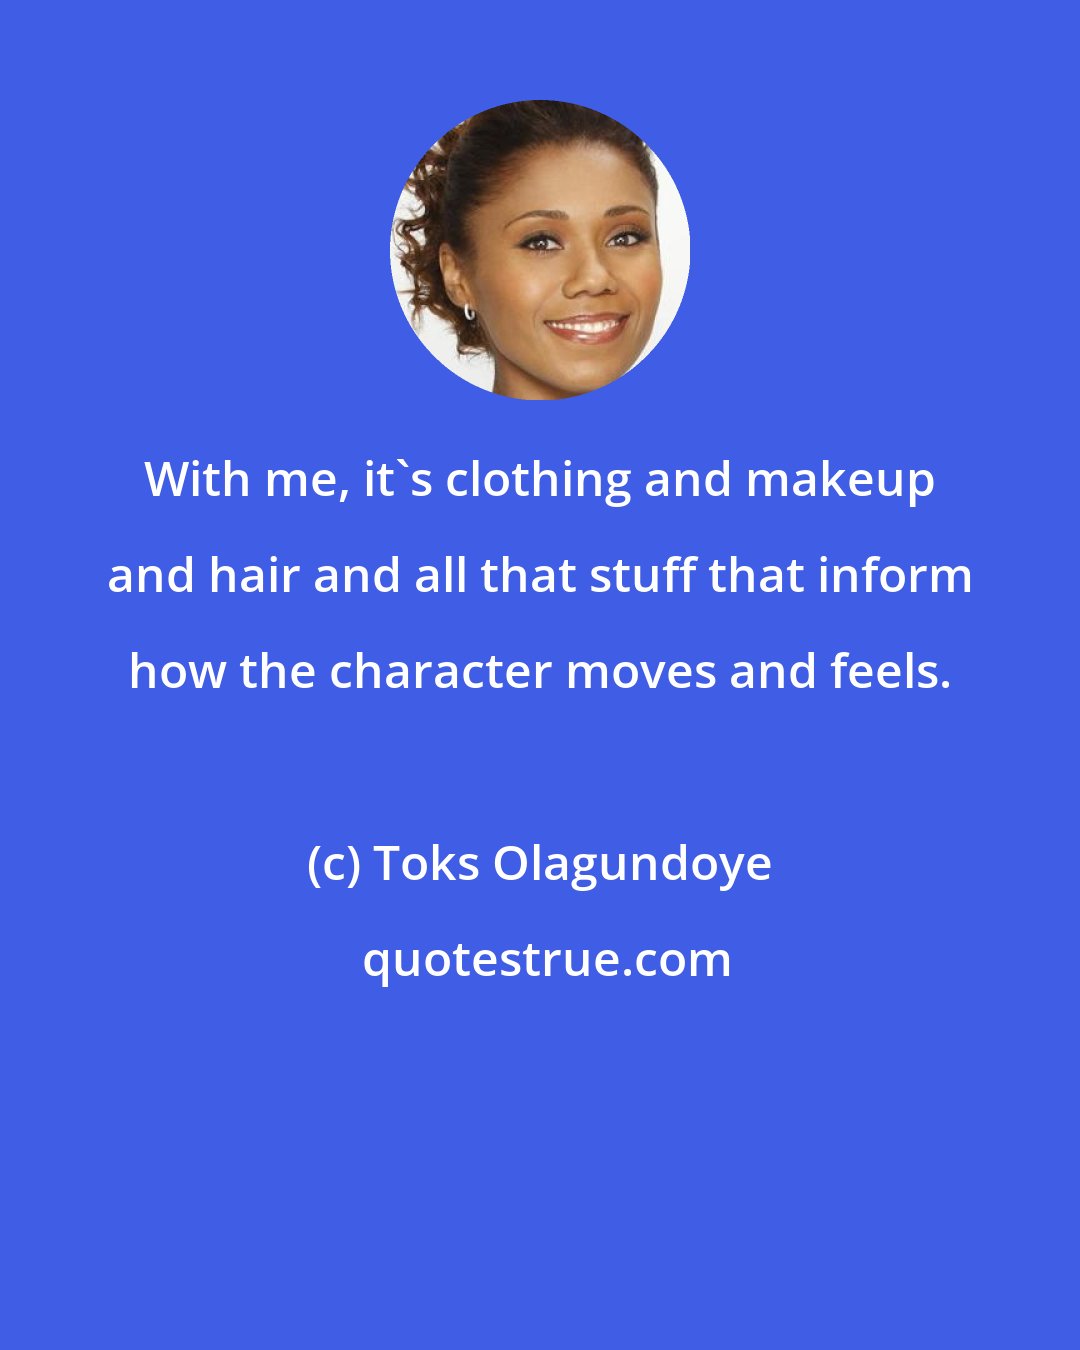 Toks Olagundoye: With me, it's clothing and makeup and hair and all that stuff that inform how the character moves and feels.